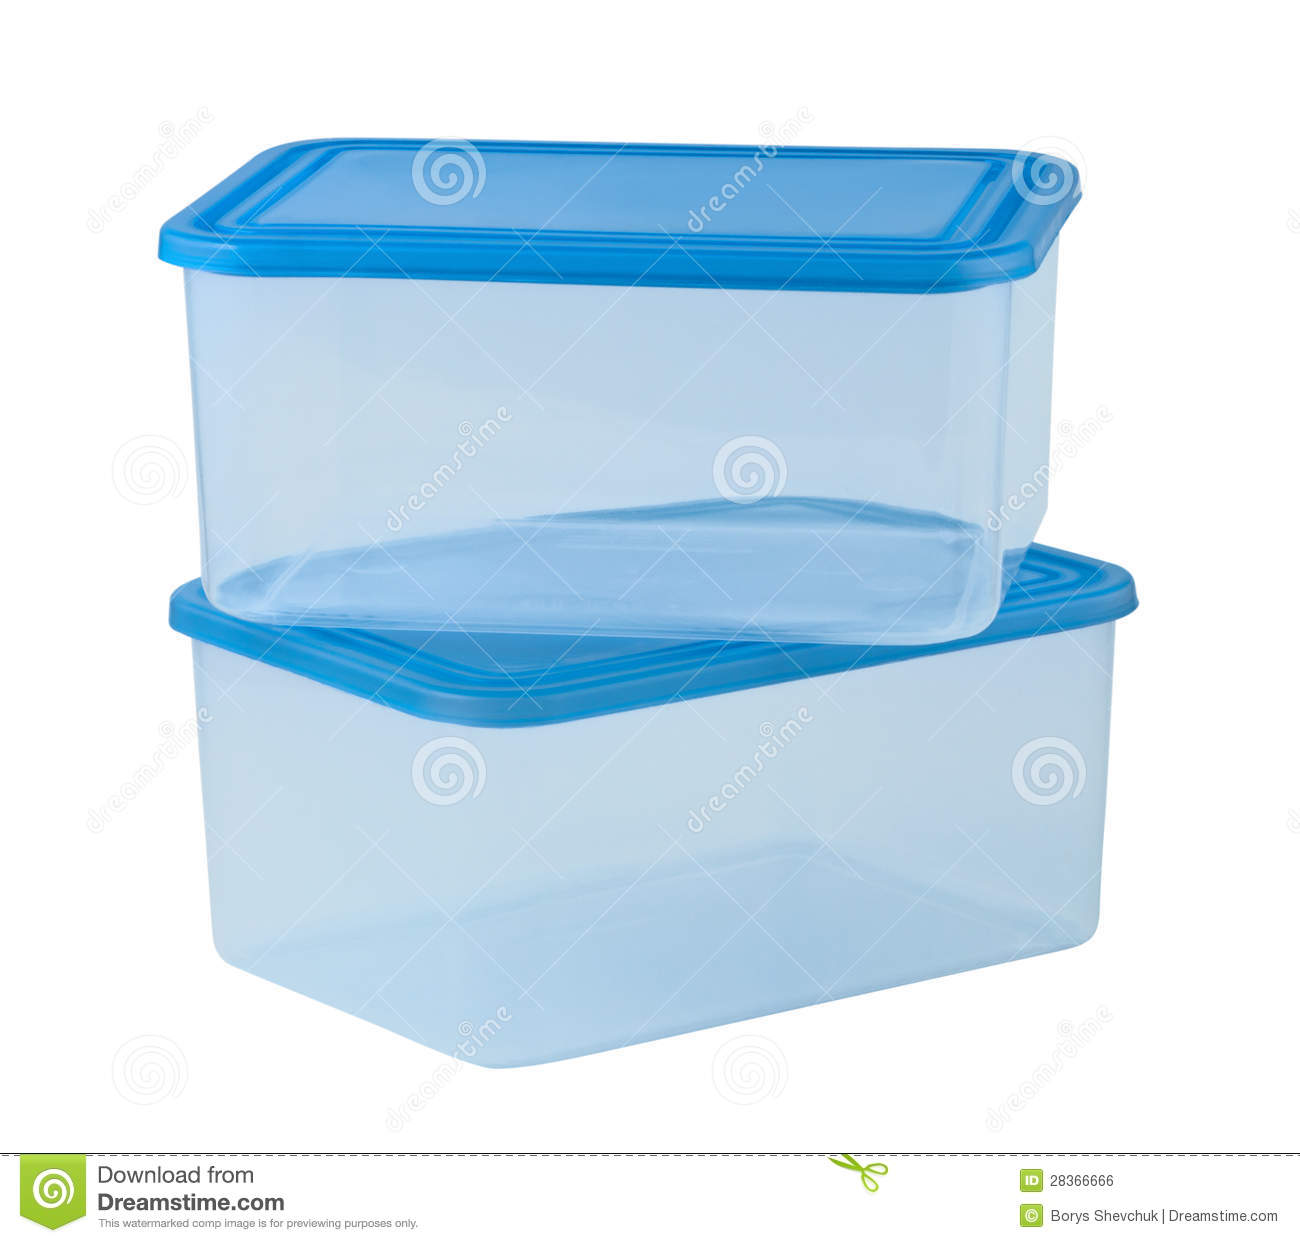 Plastic Container For Food Royalty Free Stock Image   Image  28366666